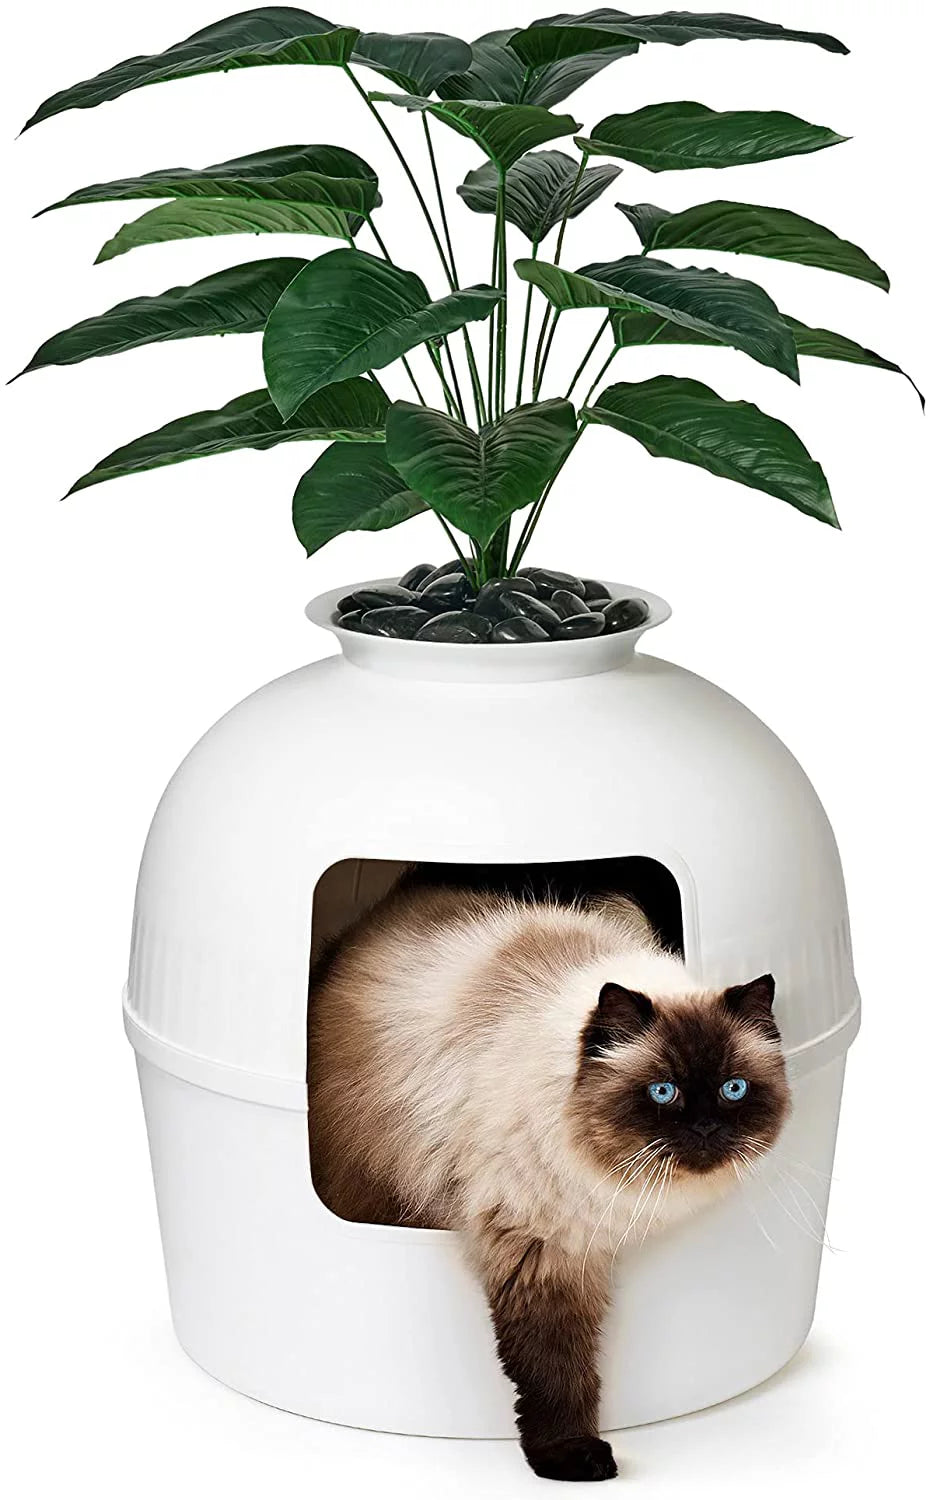 Secret Litter Box by MZDXJ - Hidden Litter Box Enclosure with Odor Control Carbon Filter, Faux Plant and Real Stones, Perfect for Large Cats Animals & Pet Supplies > Pet Supplies > Cat Supplies > Cat Furniture MZDXJ Vivid White  